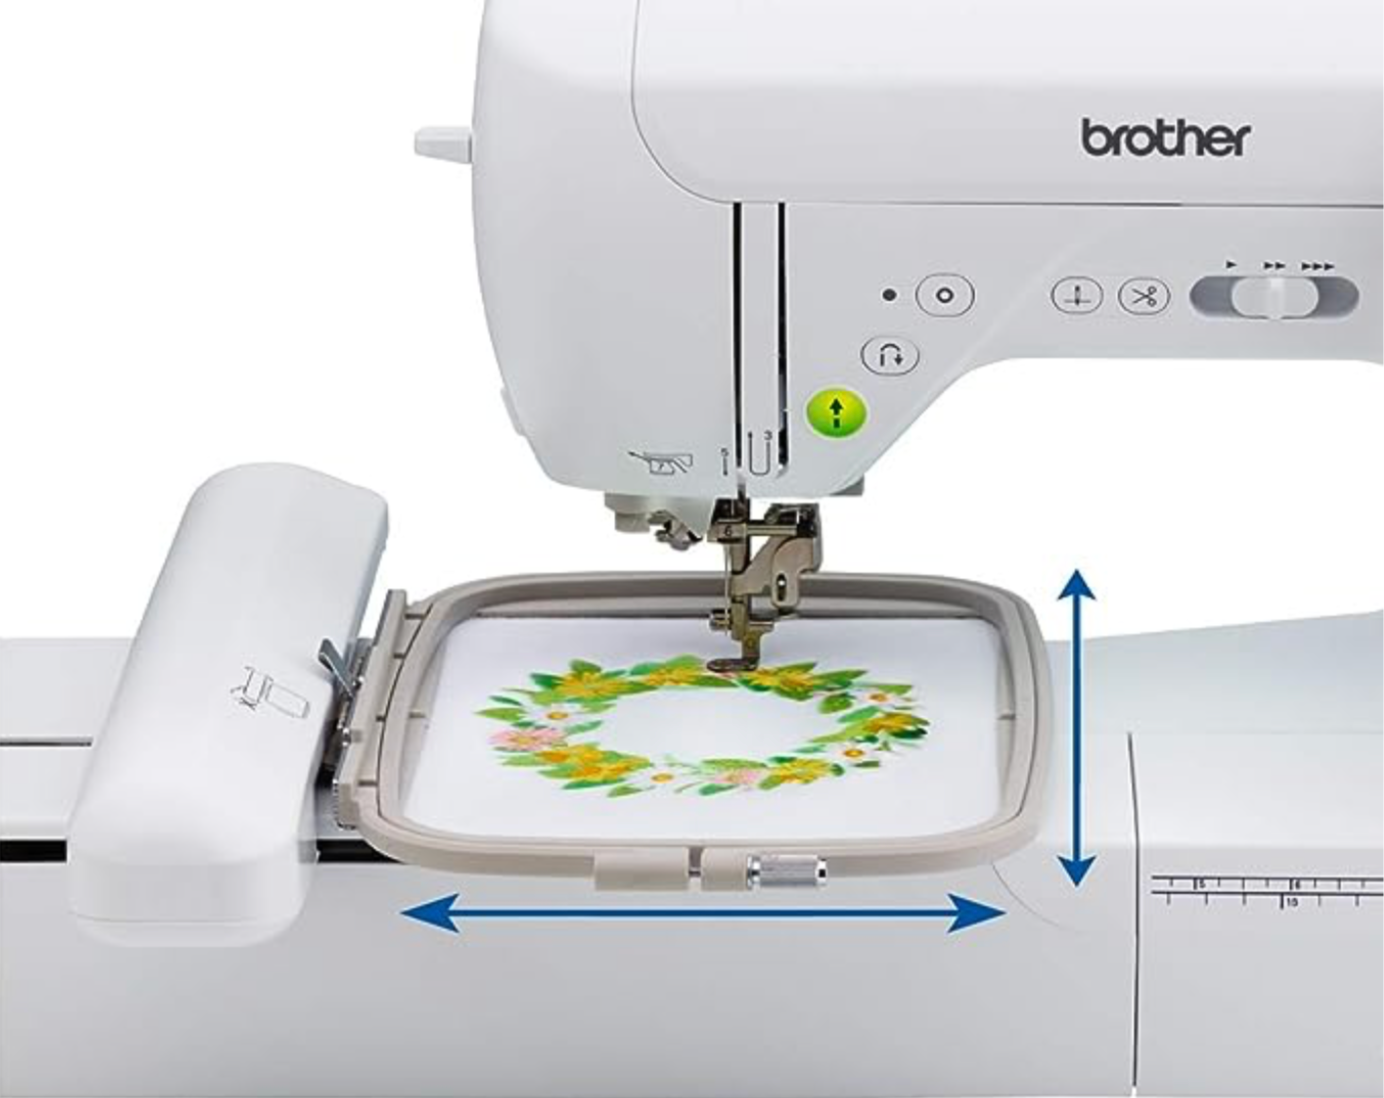 Brother LB5000 Computerized Sewing and Embroidery Machine